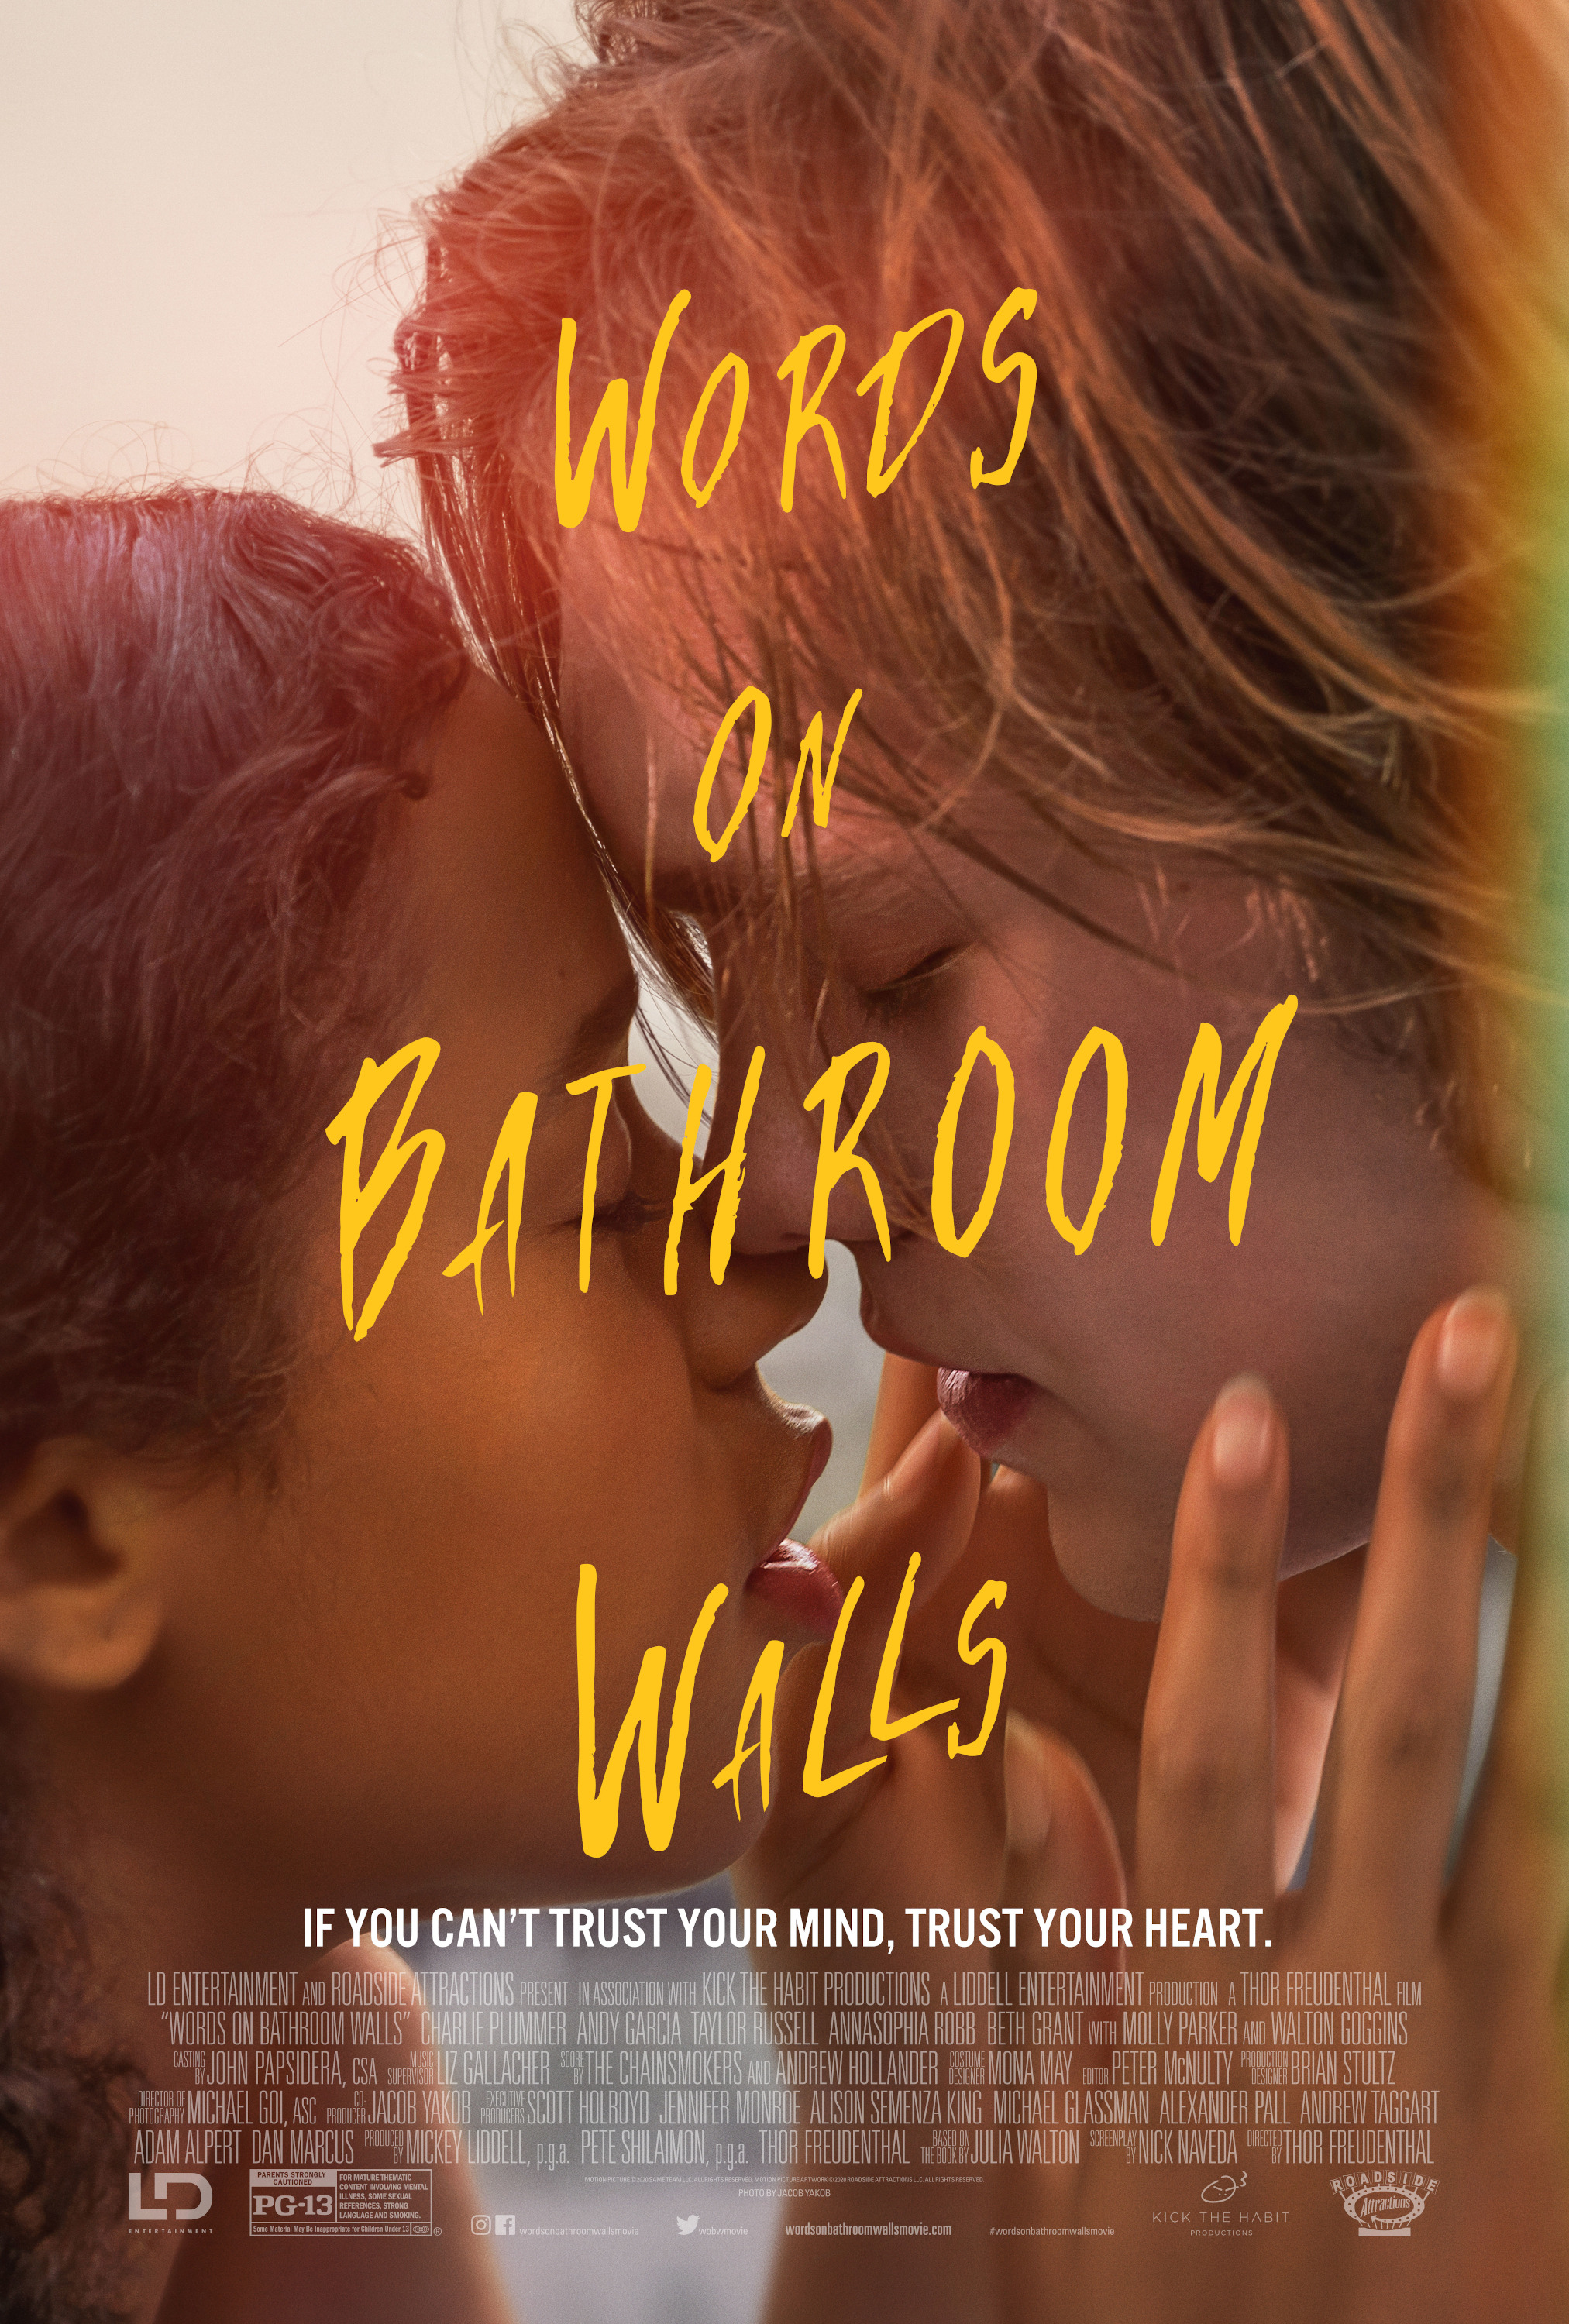 Mega Sized Movie Poster Image for Words on Bathroom Walls 